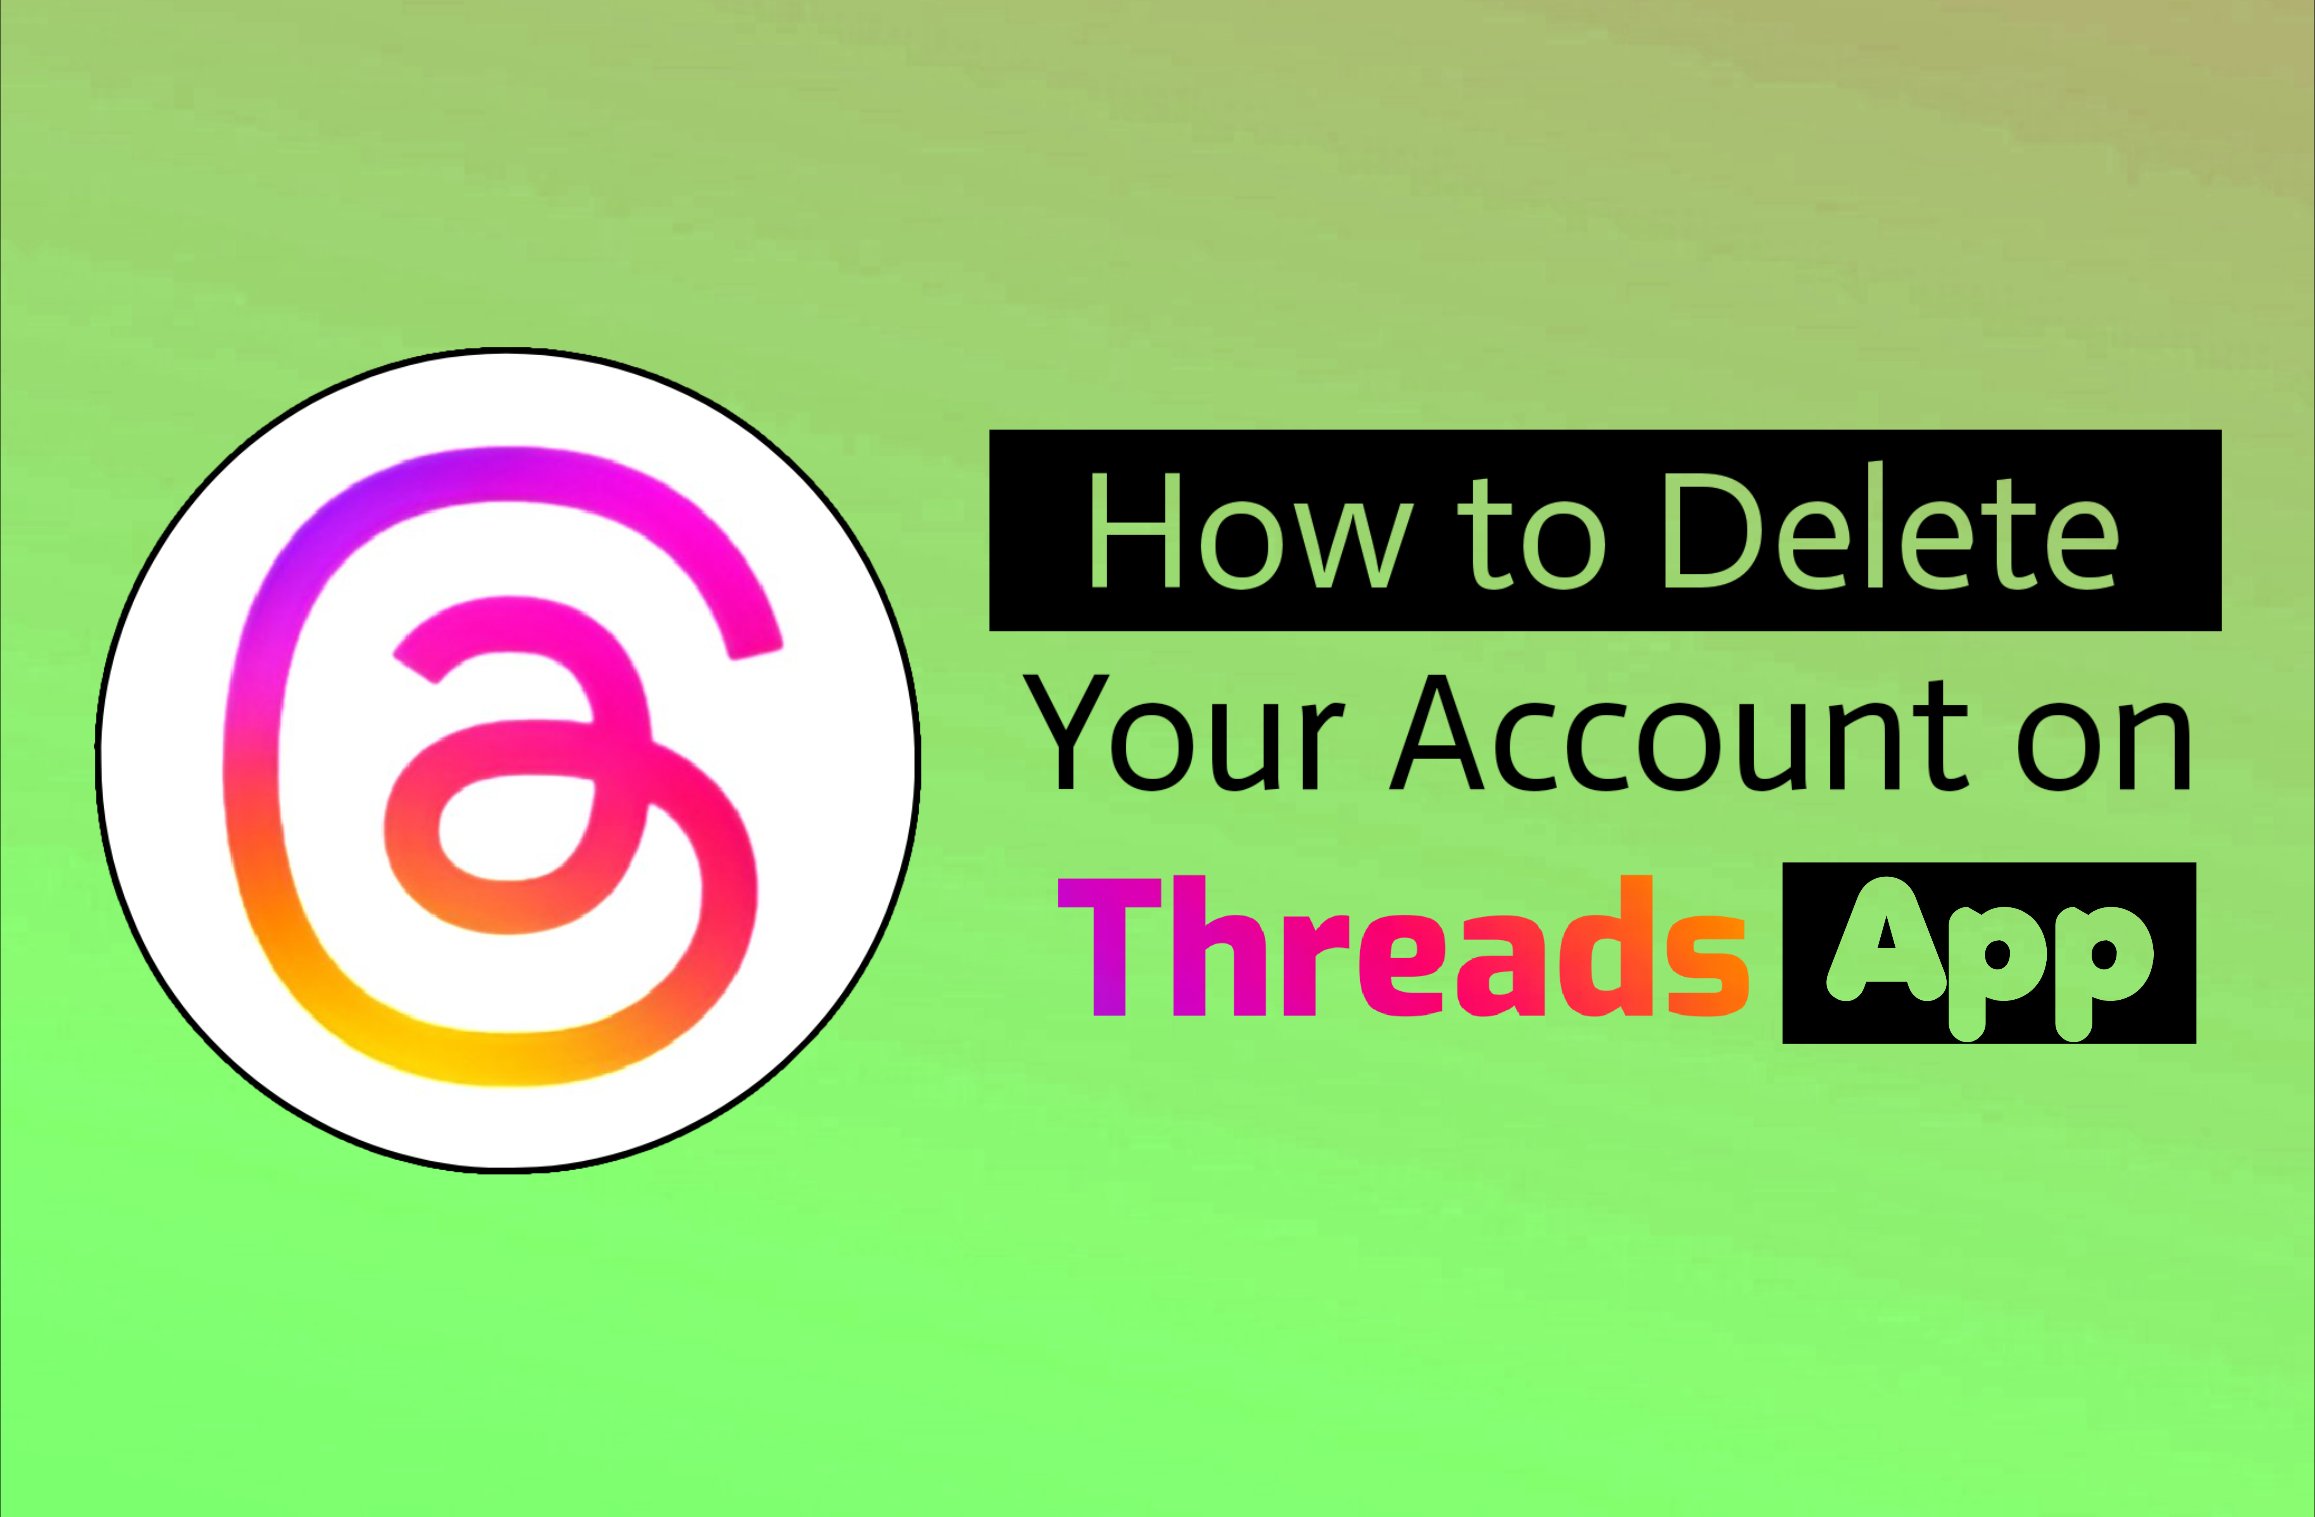 How to delete your Threads Account